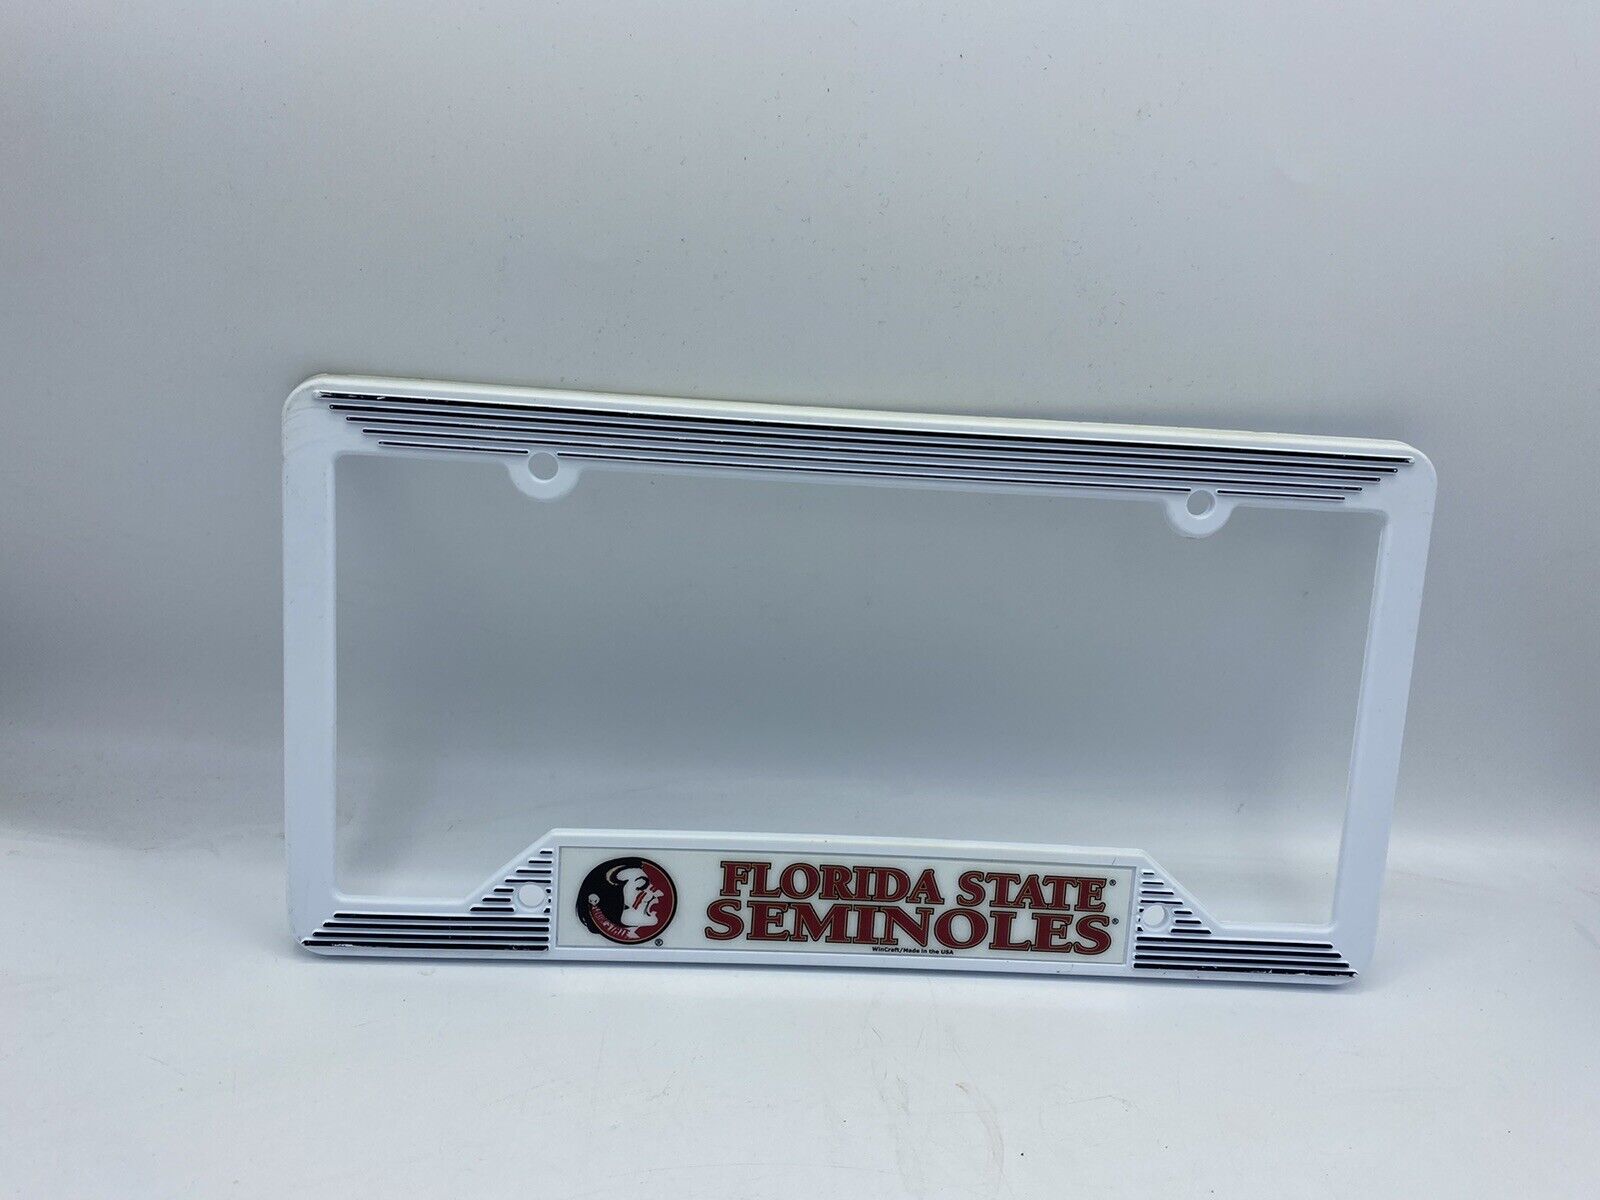 License Plate Frame Made In USA - Tag Holder - NCAA - Seminoles Florida State